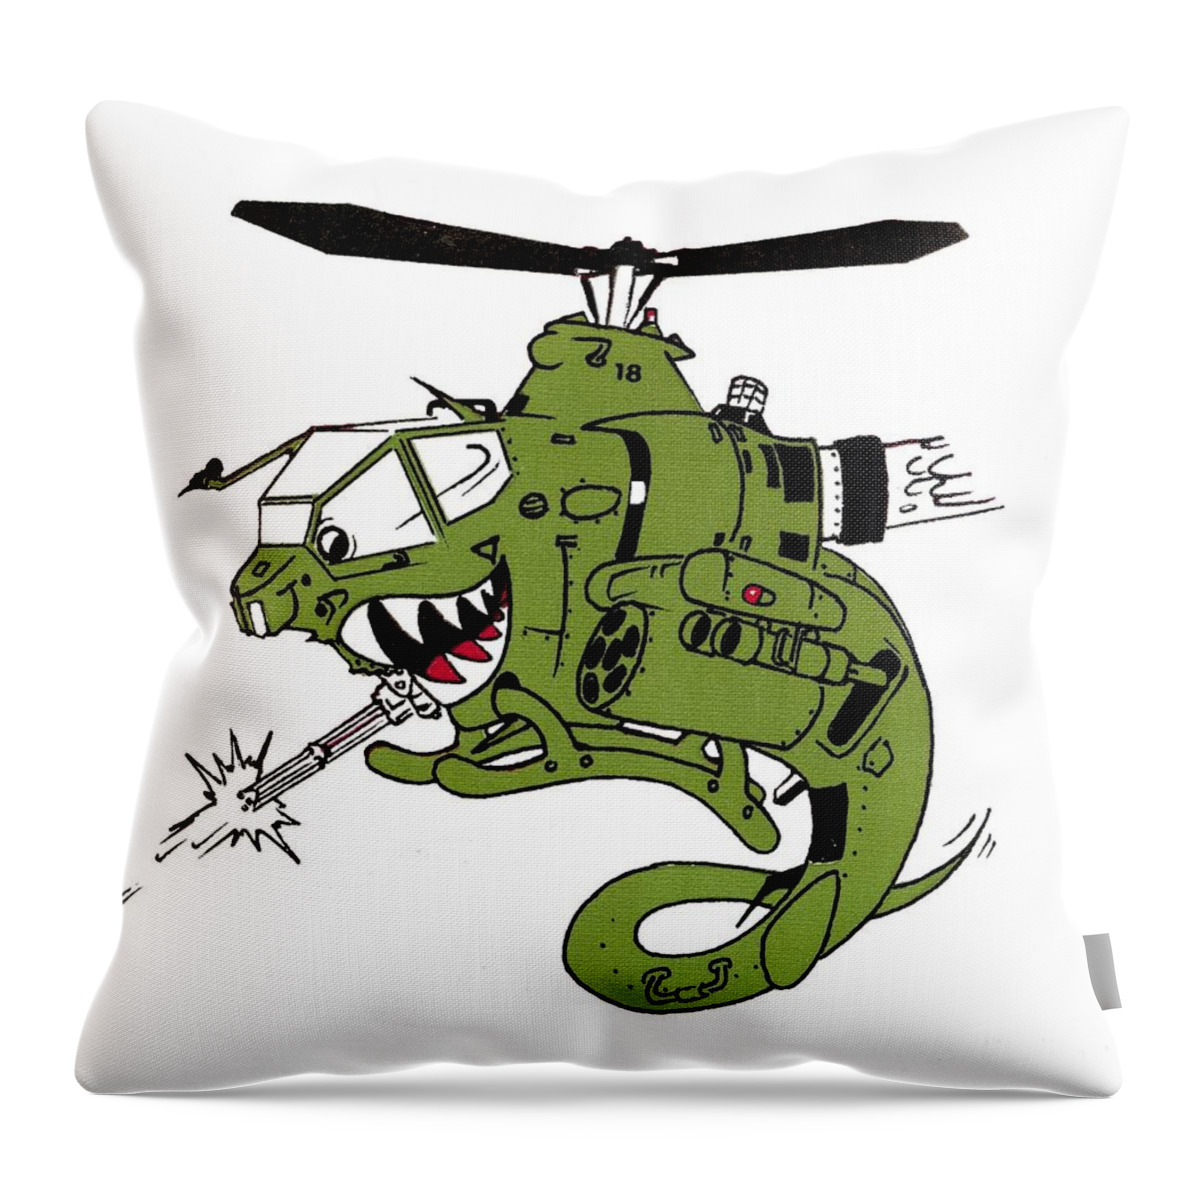 Helicopter Throw Pillow featuring the drawing Cobra by Julio R Lopez Jr